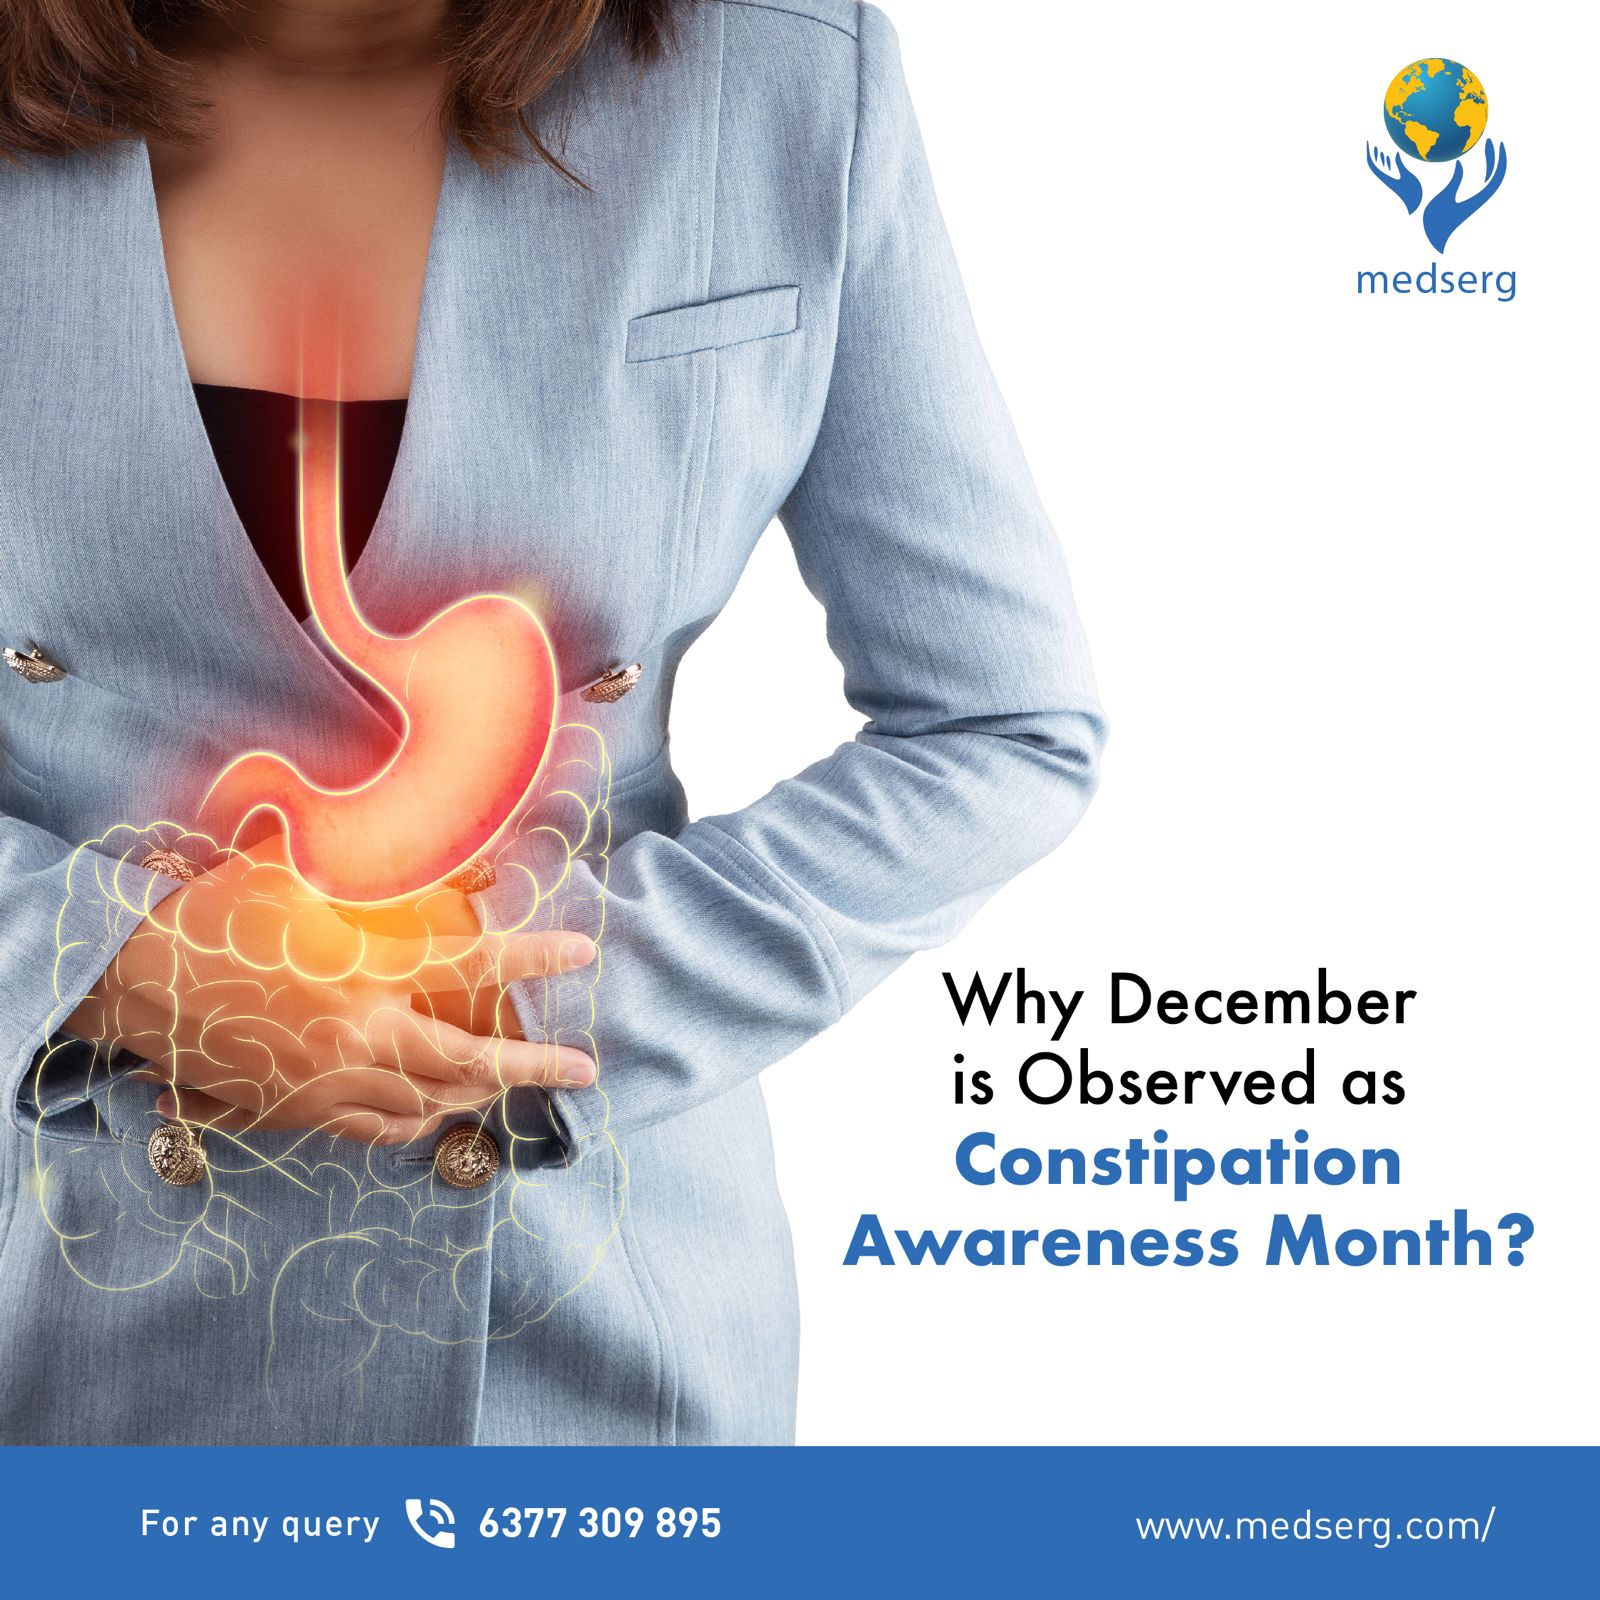 Why December is observed as Constipation awareness month?